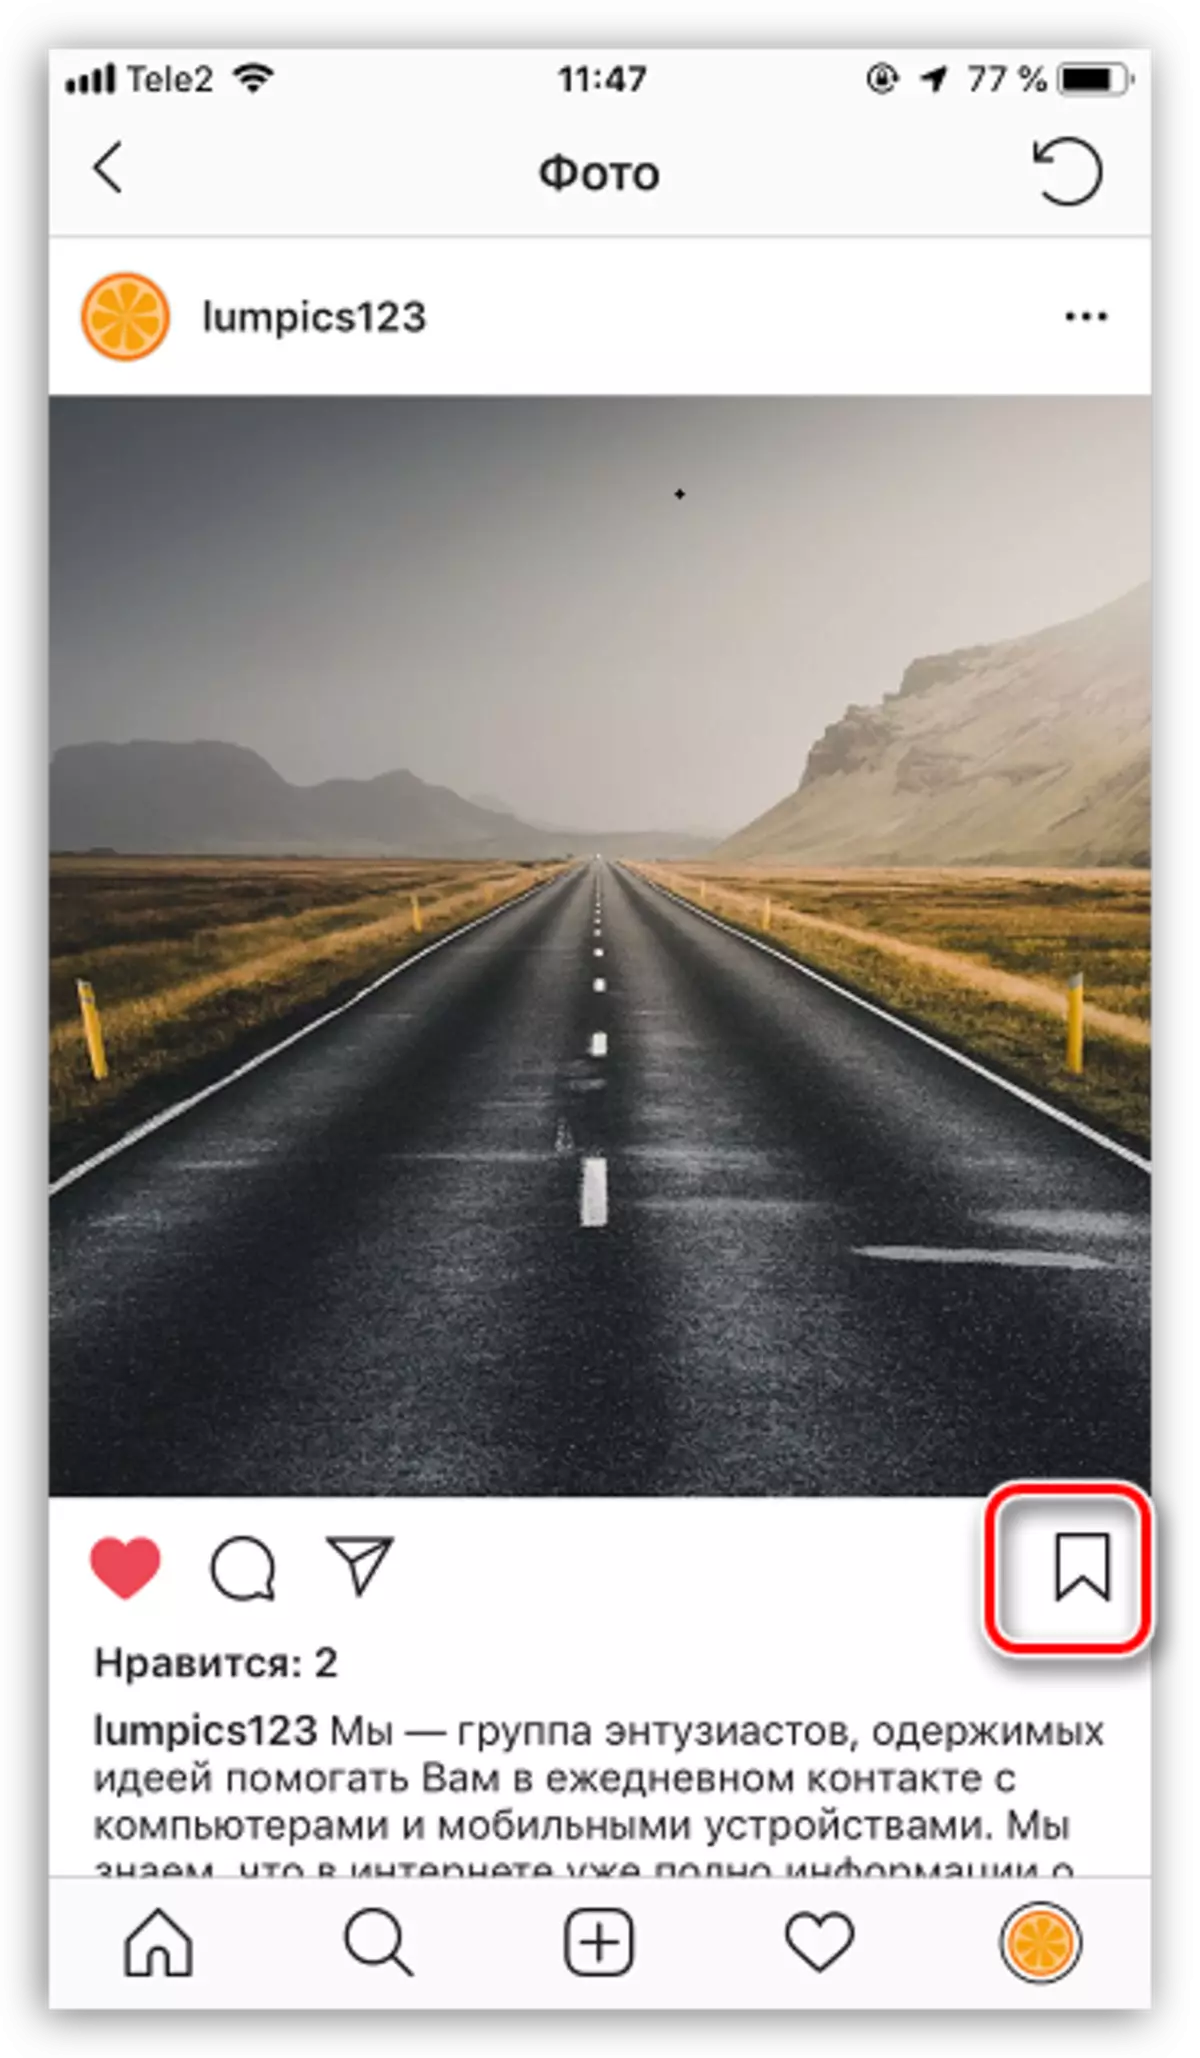 Adding publication in Instagram to bookmarks